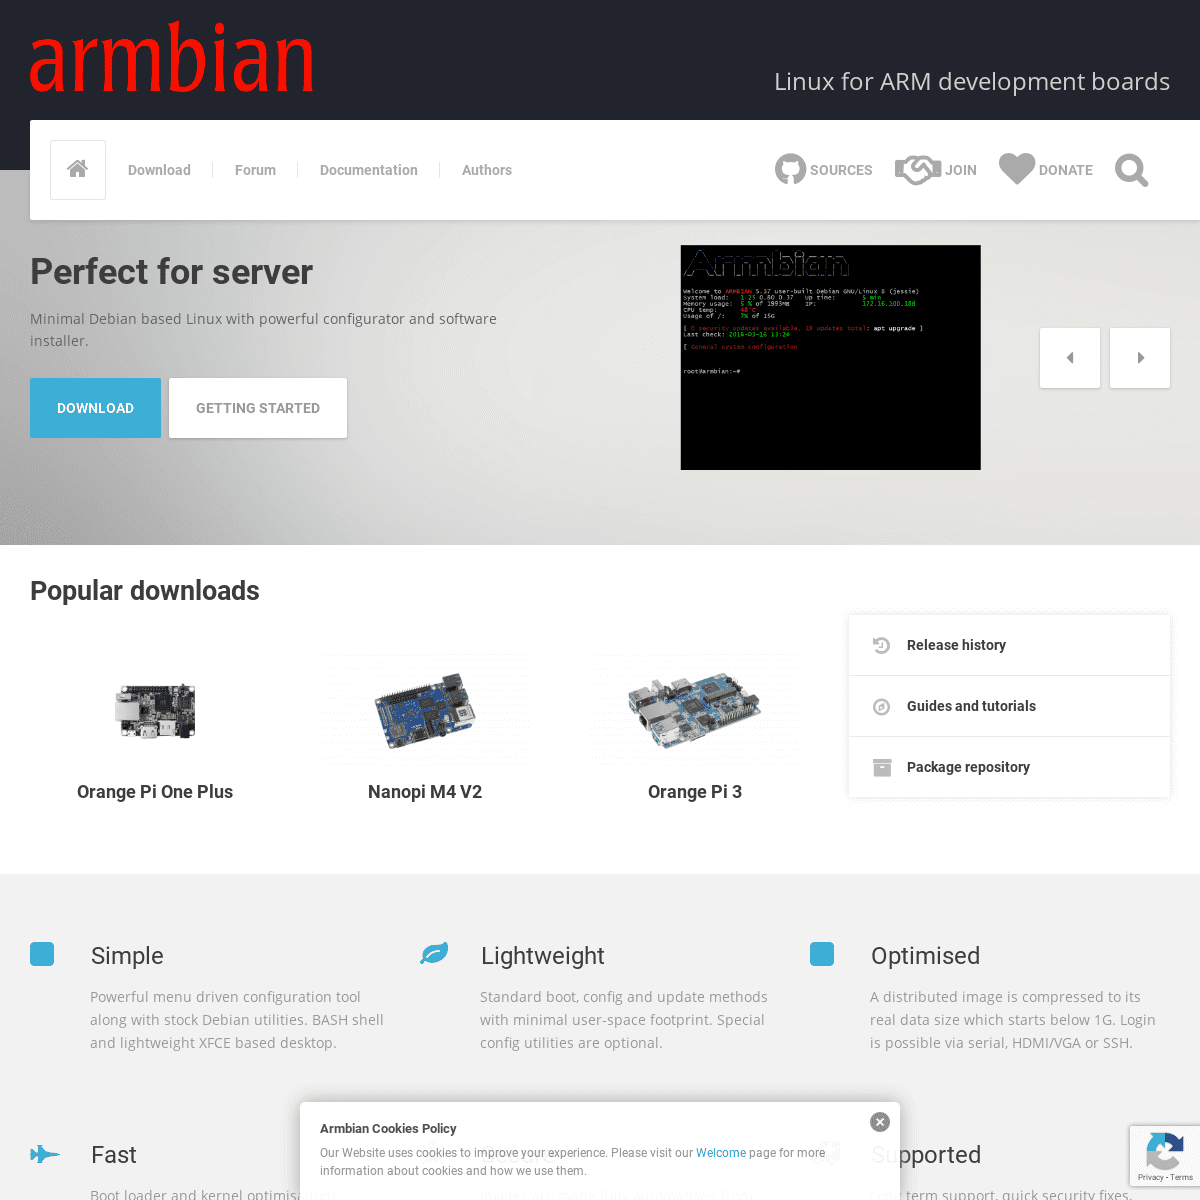 A complete backup of armbian.com